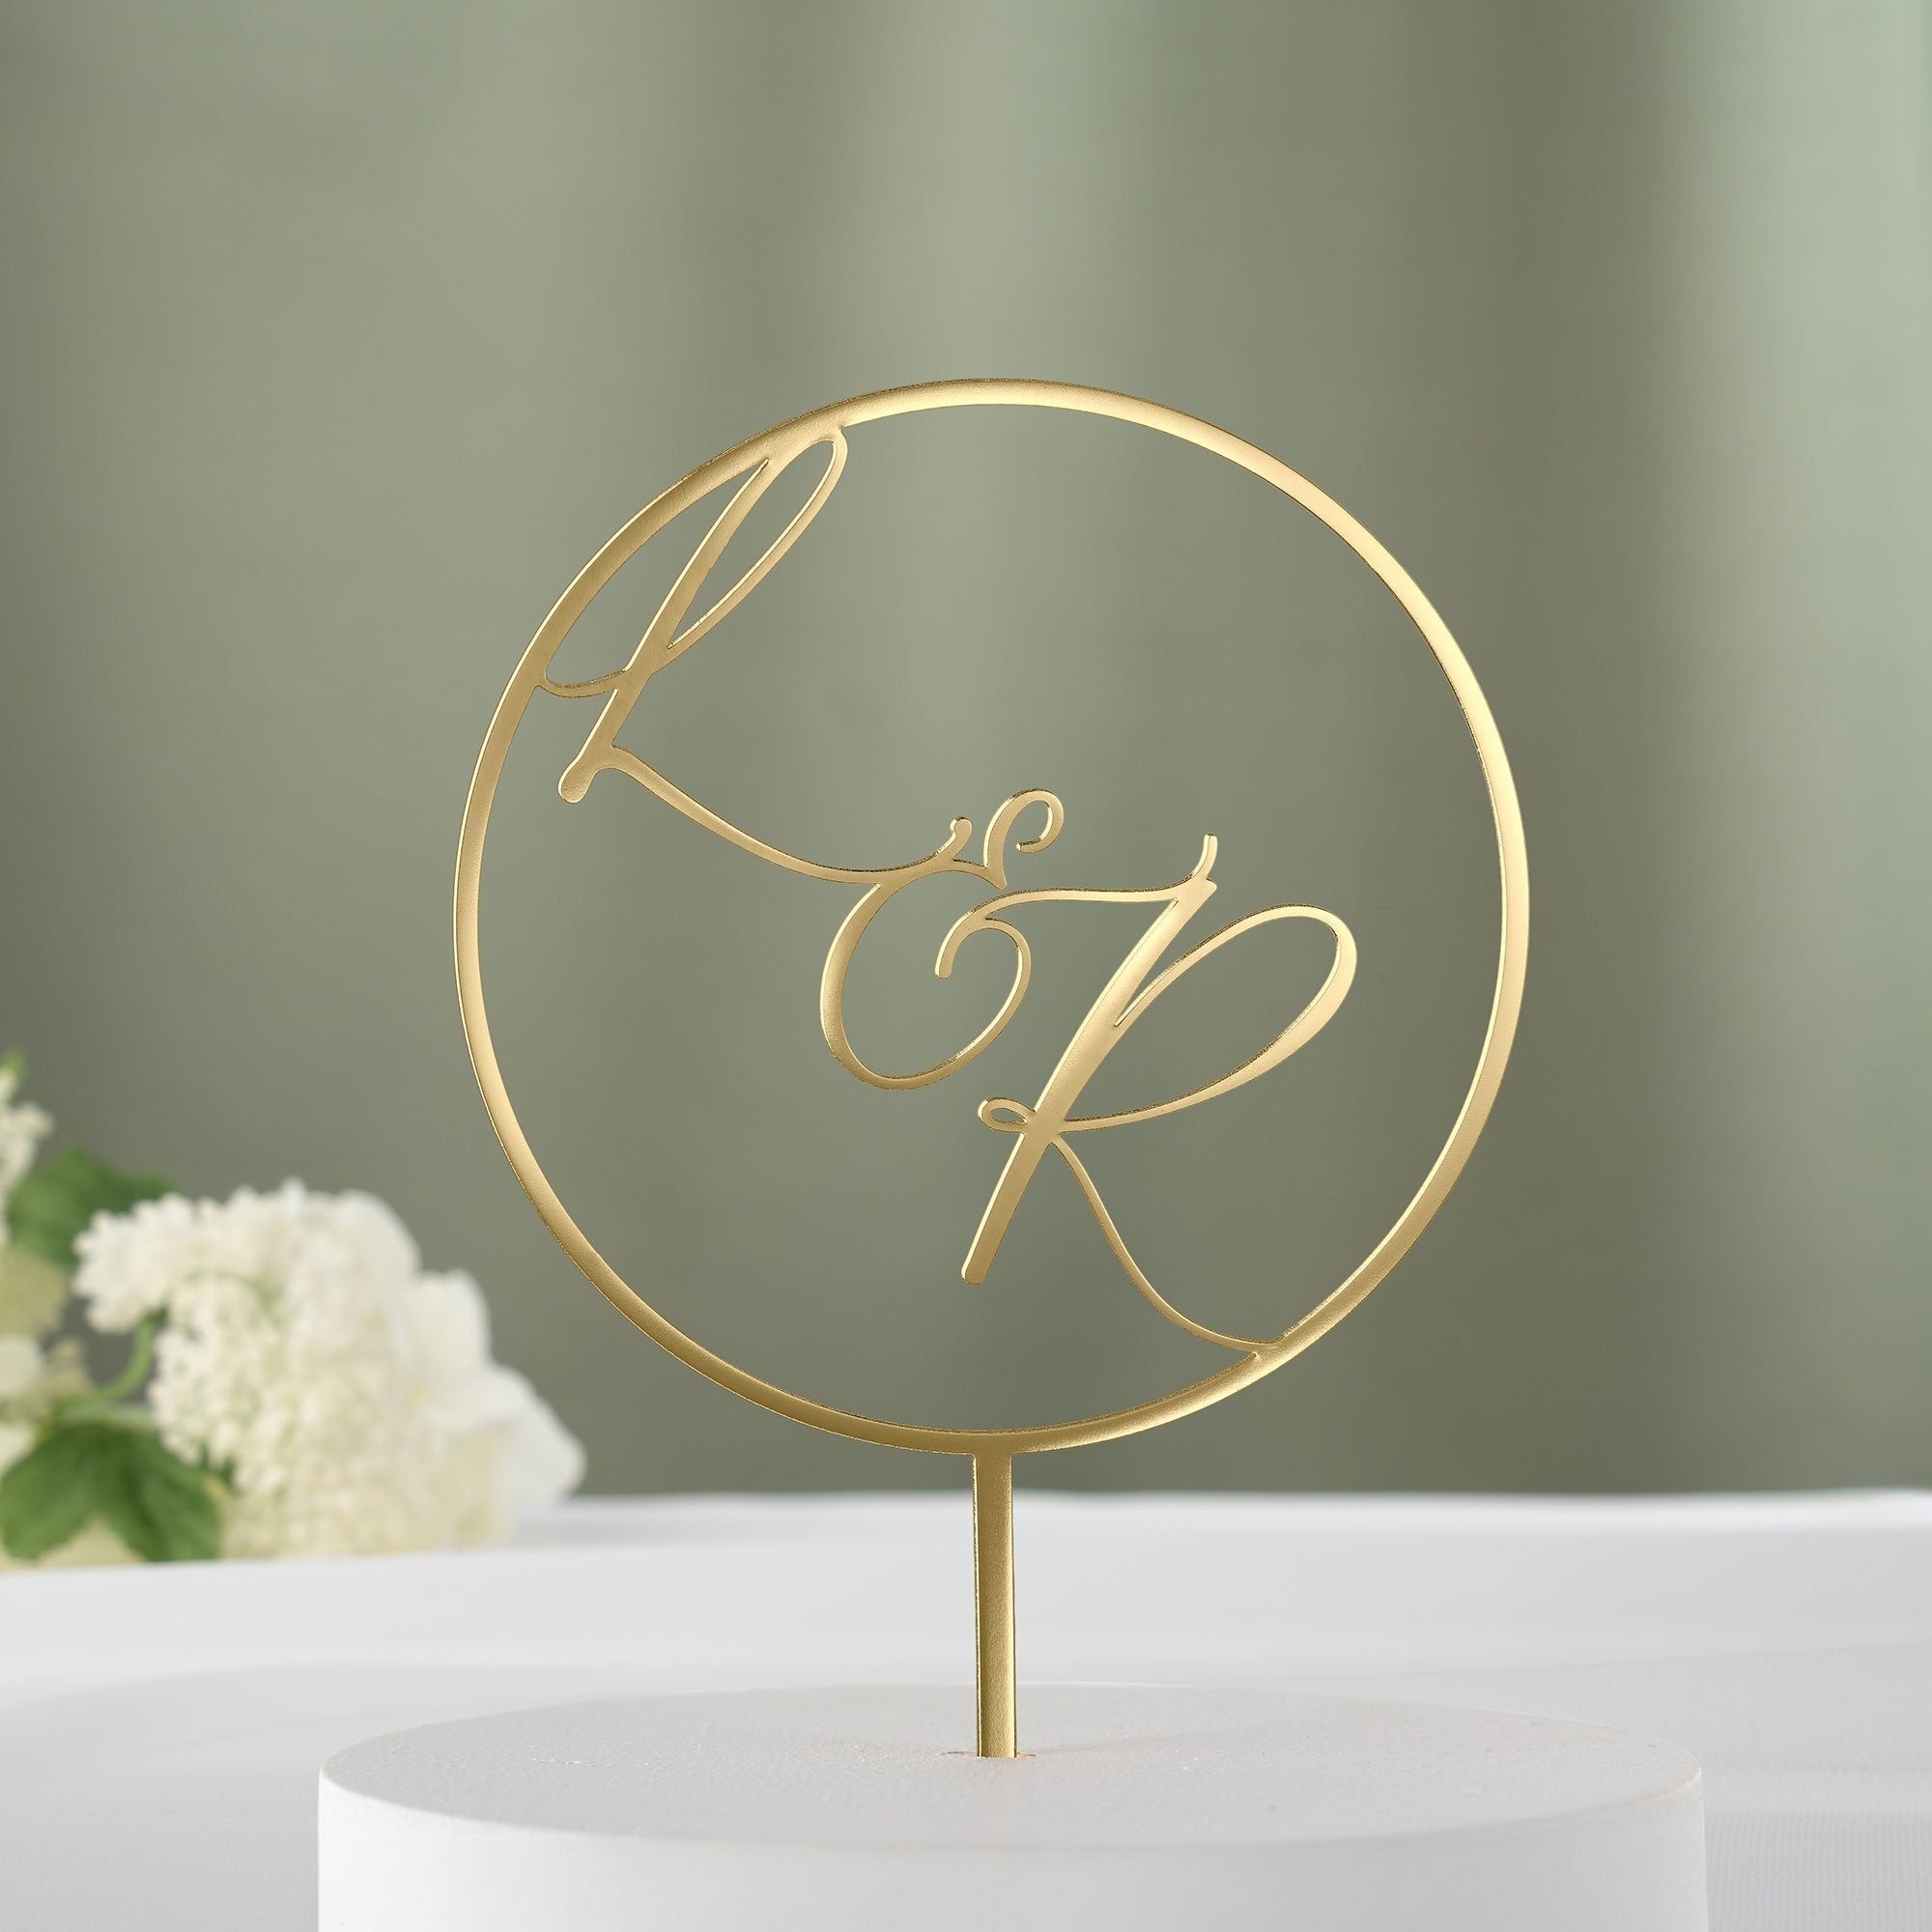 Personalised Gold Plated Dual Initials Wedding Cake Topper